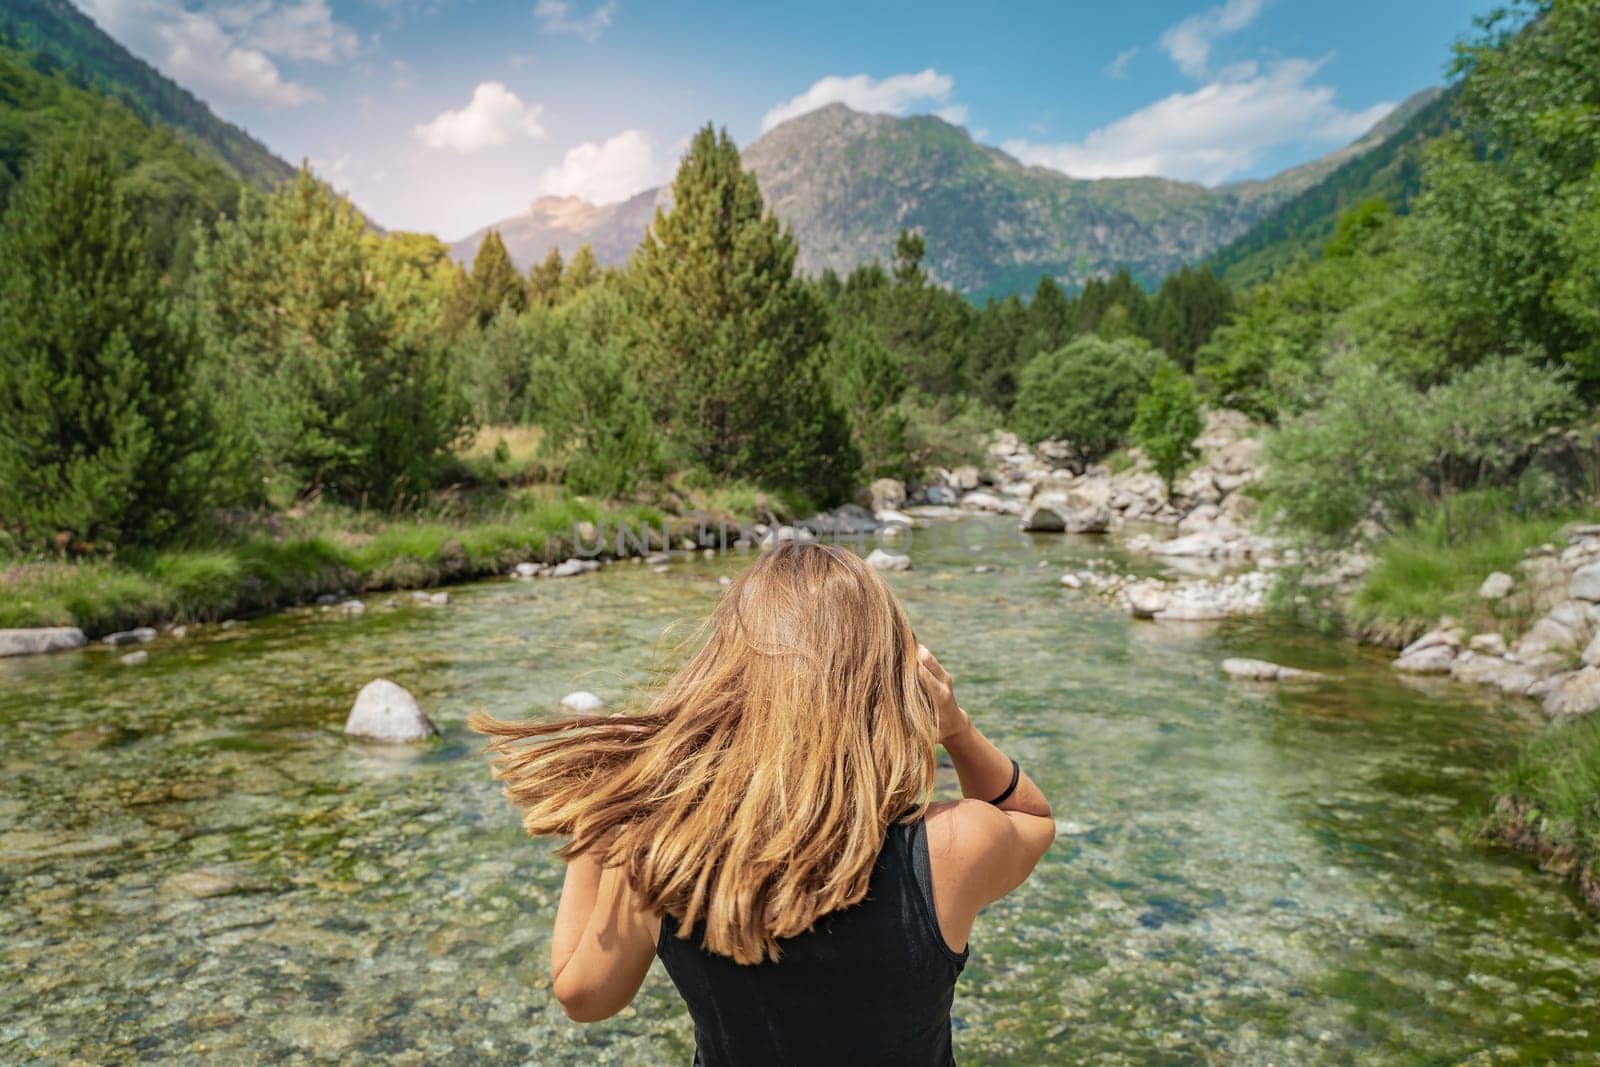 Summer background with a girl with golden blonde hair in front of a crystal clear river and high mountain. High quality photo